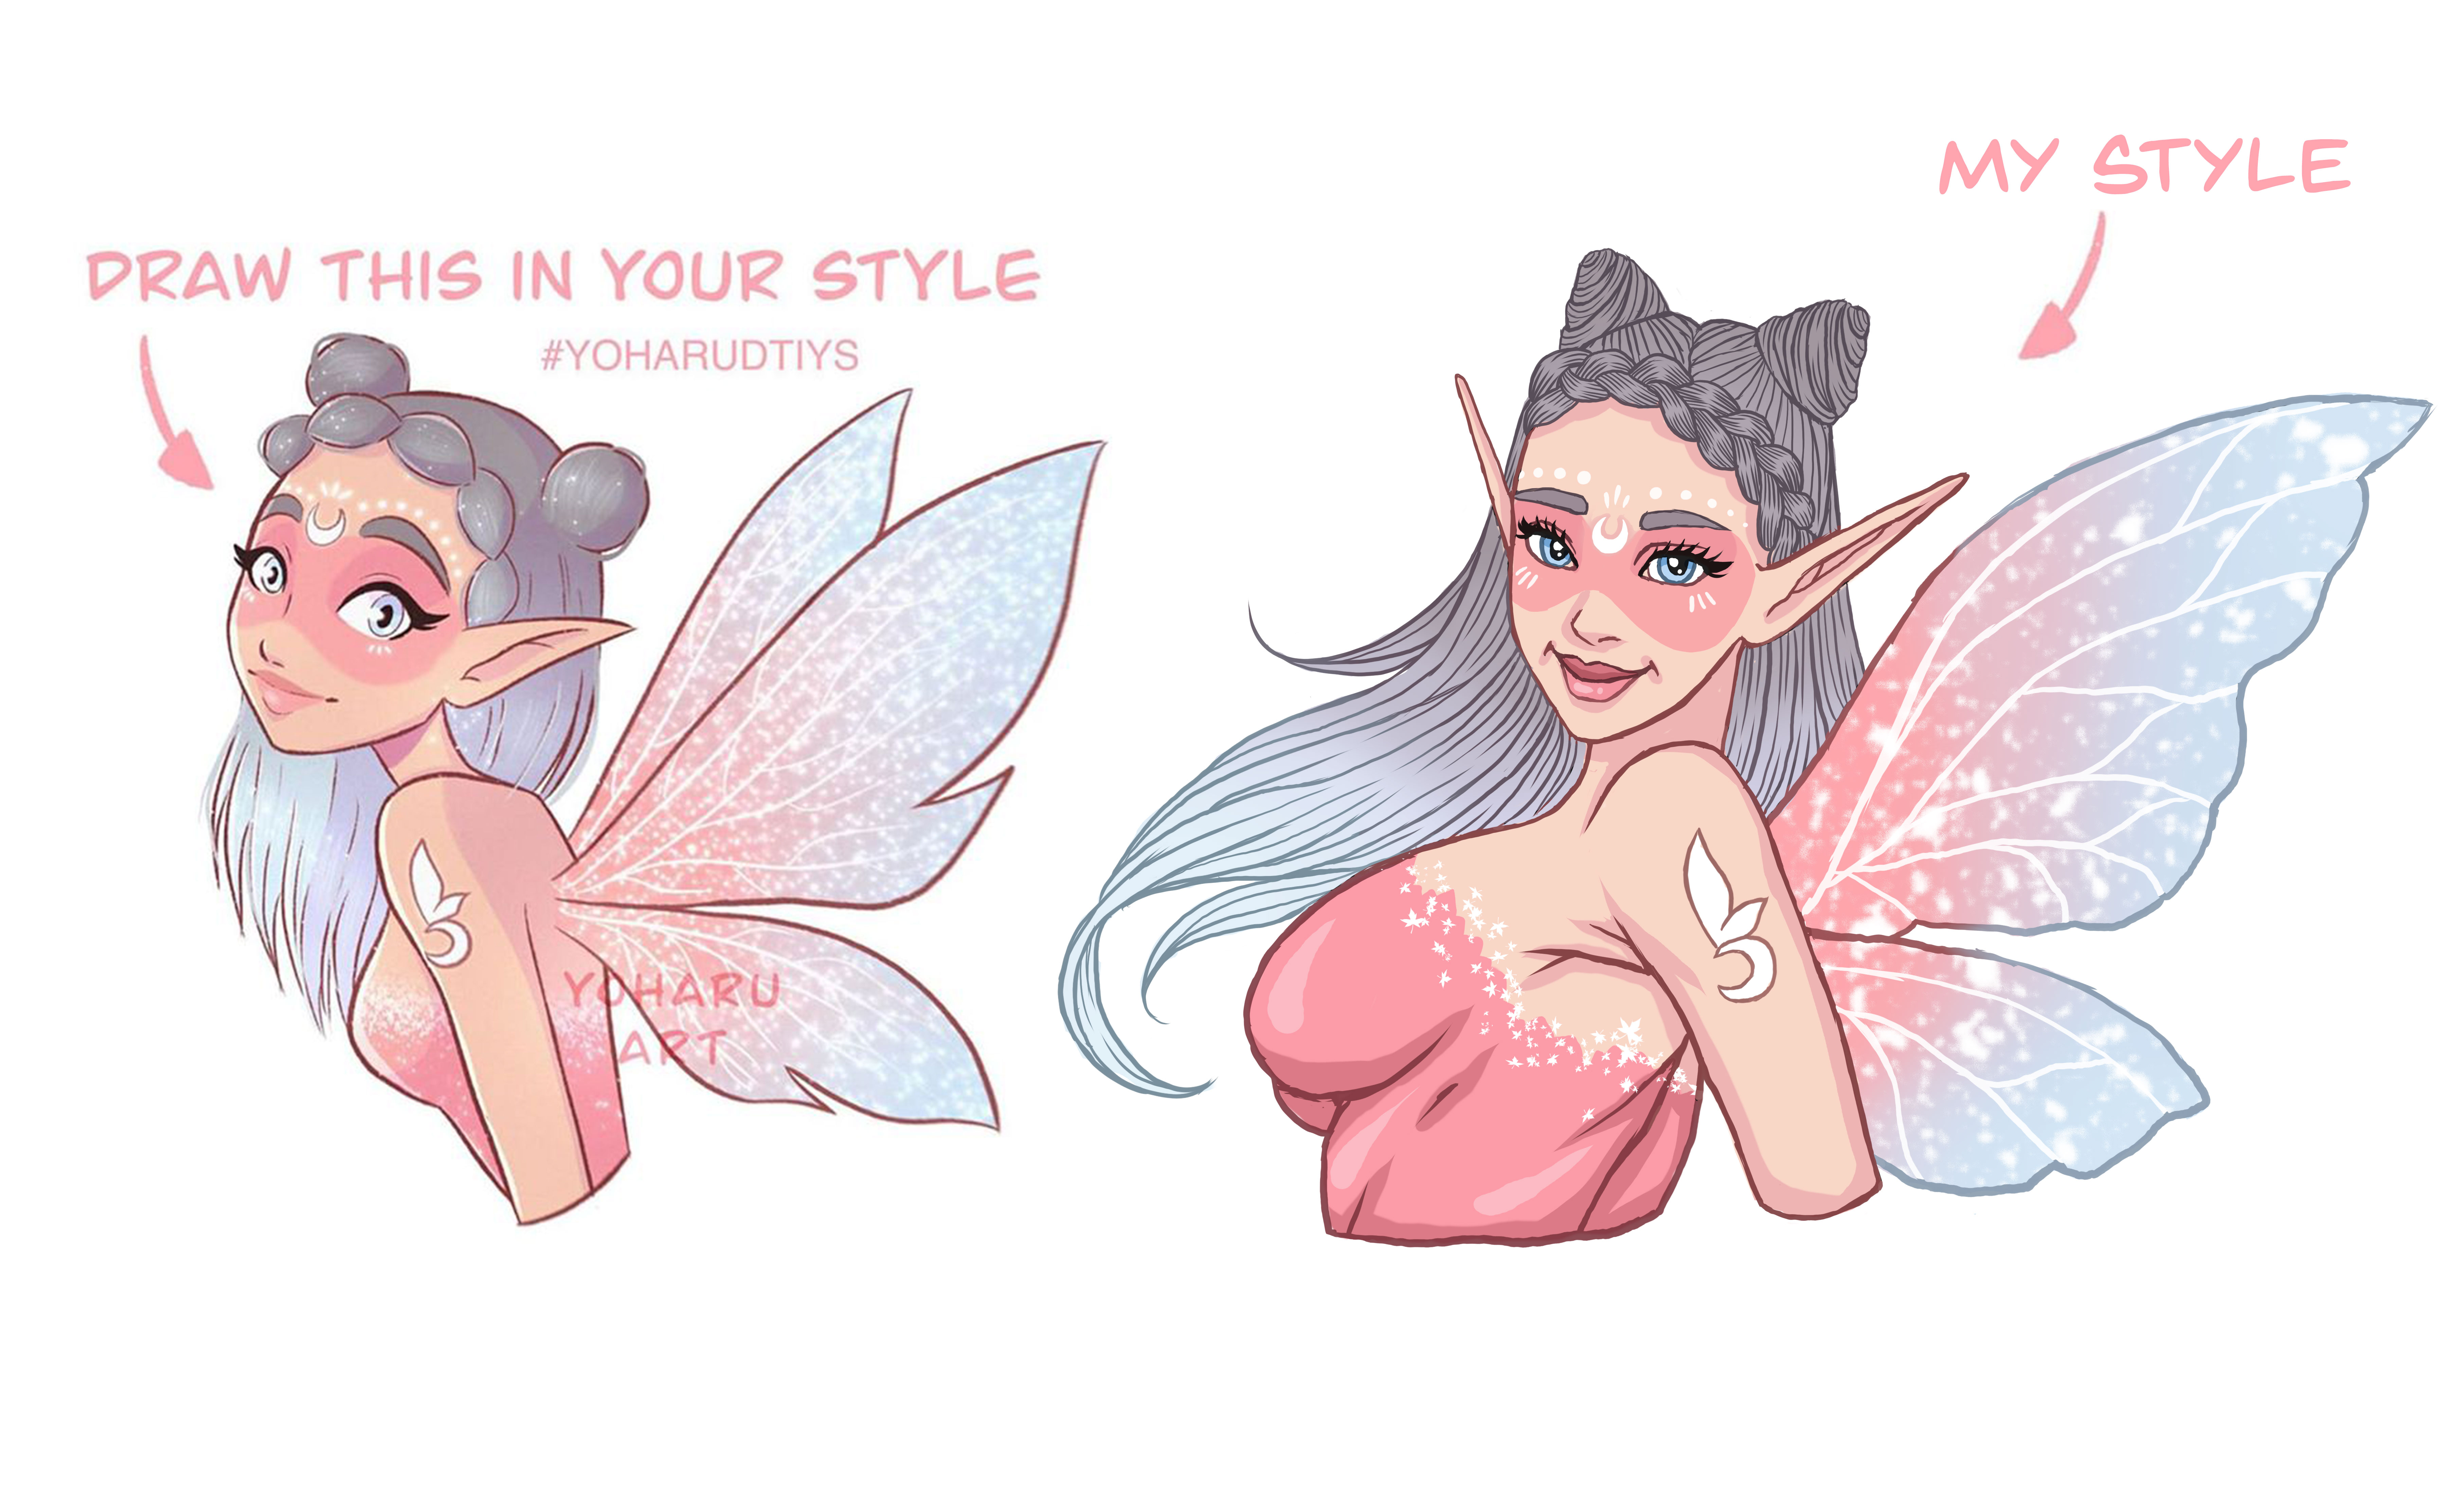 Fairy Concept Draw This In Your Style Challenge By My Sin Is You On Deviantart